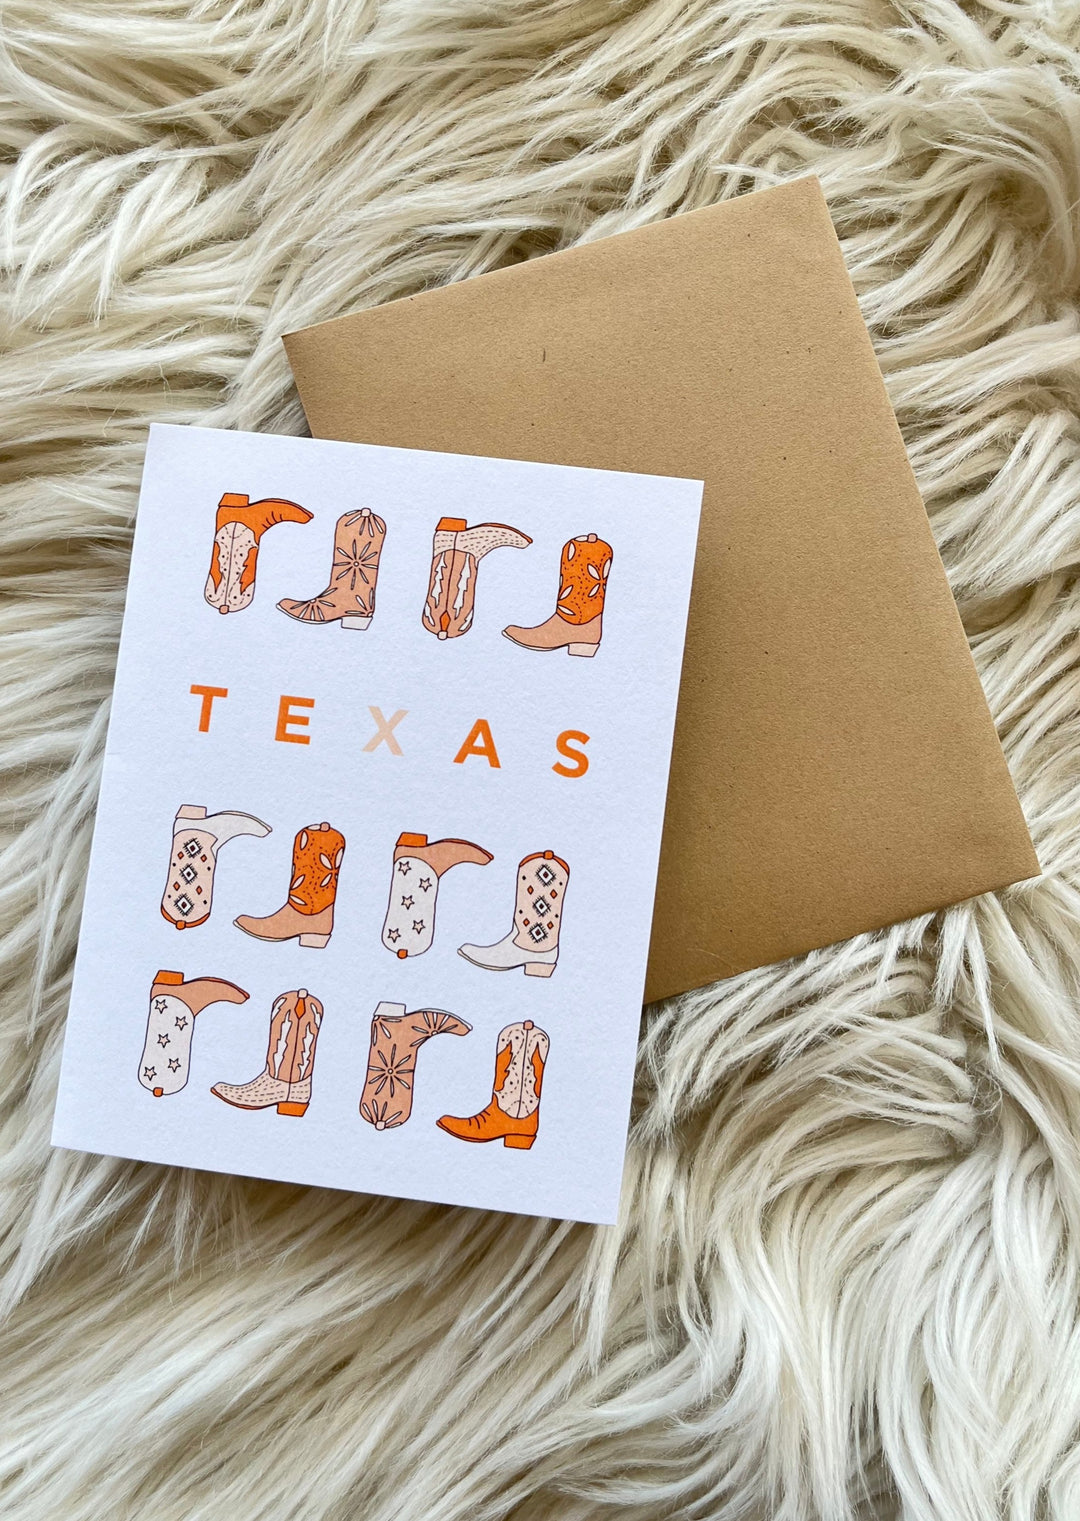 Greeting Card, misc, Adeline, Adeline, dallas boutique, dallas texas, texas boutique, women's boutique dallas, adeline boutique, dallas boutique, trendy boutique, affordable boutique